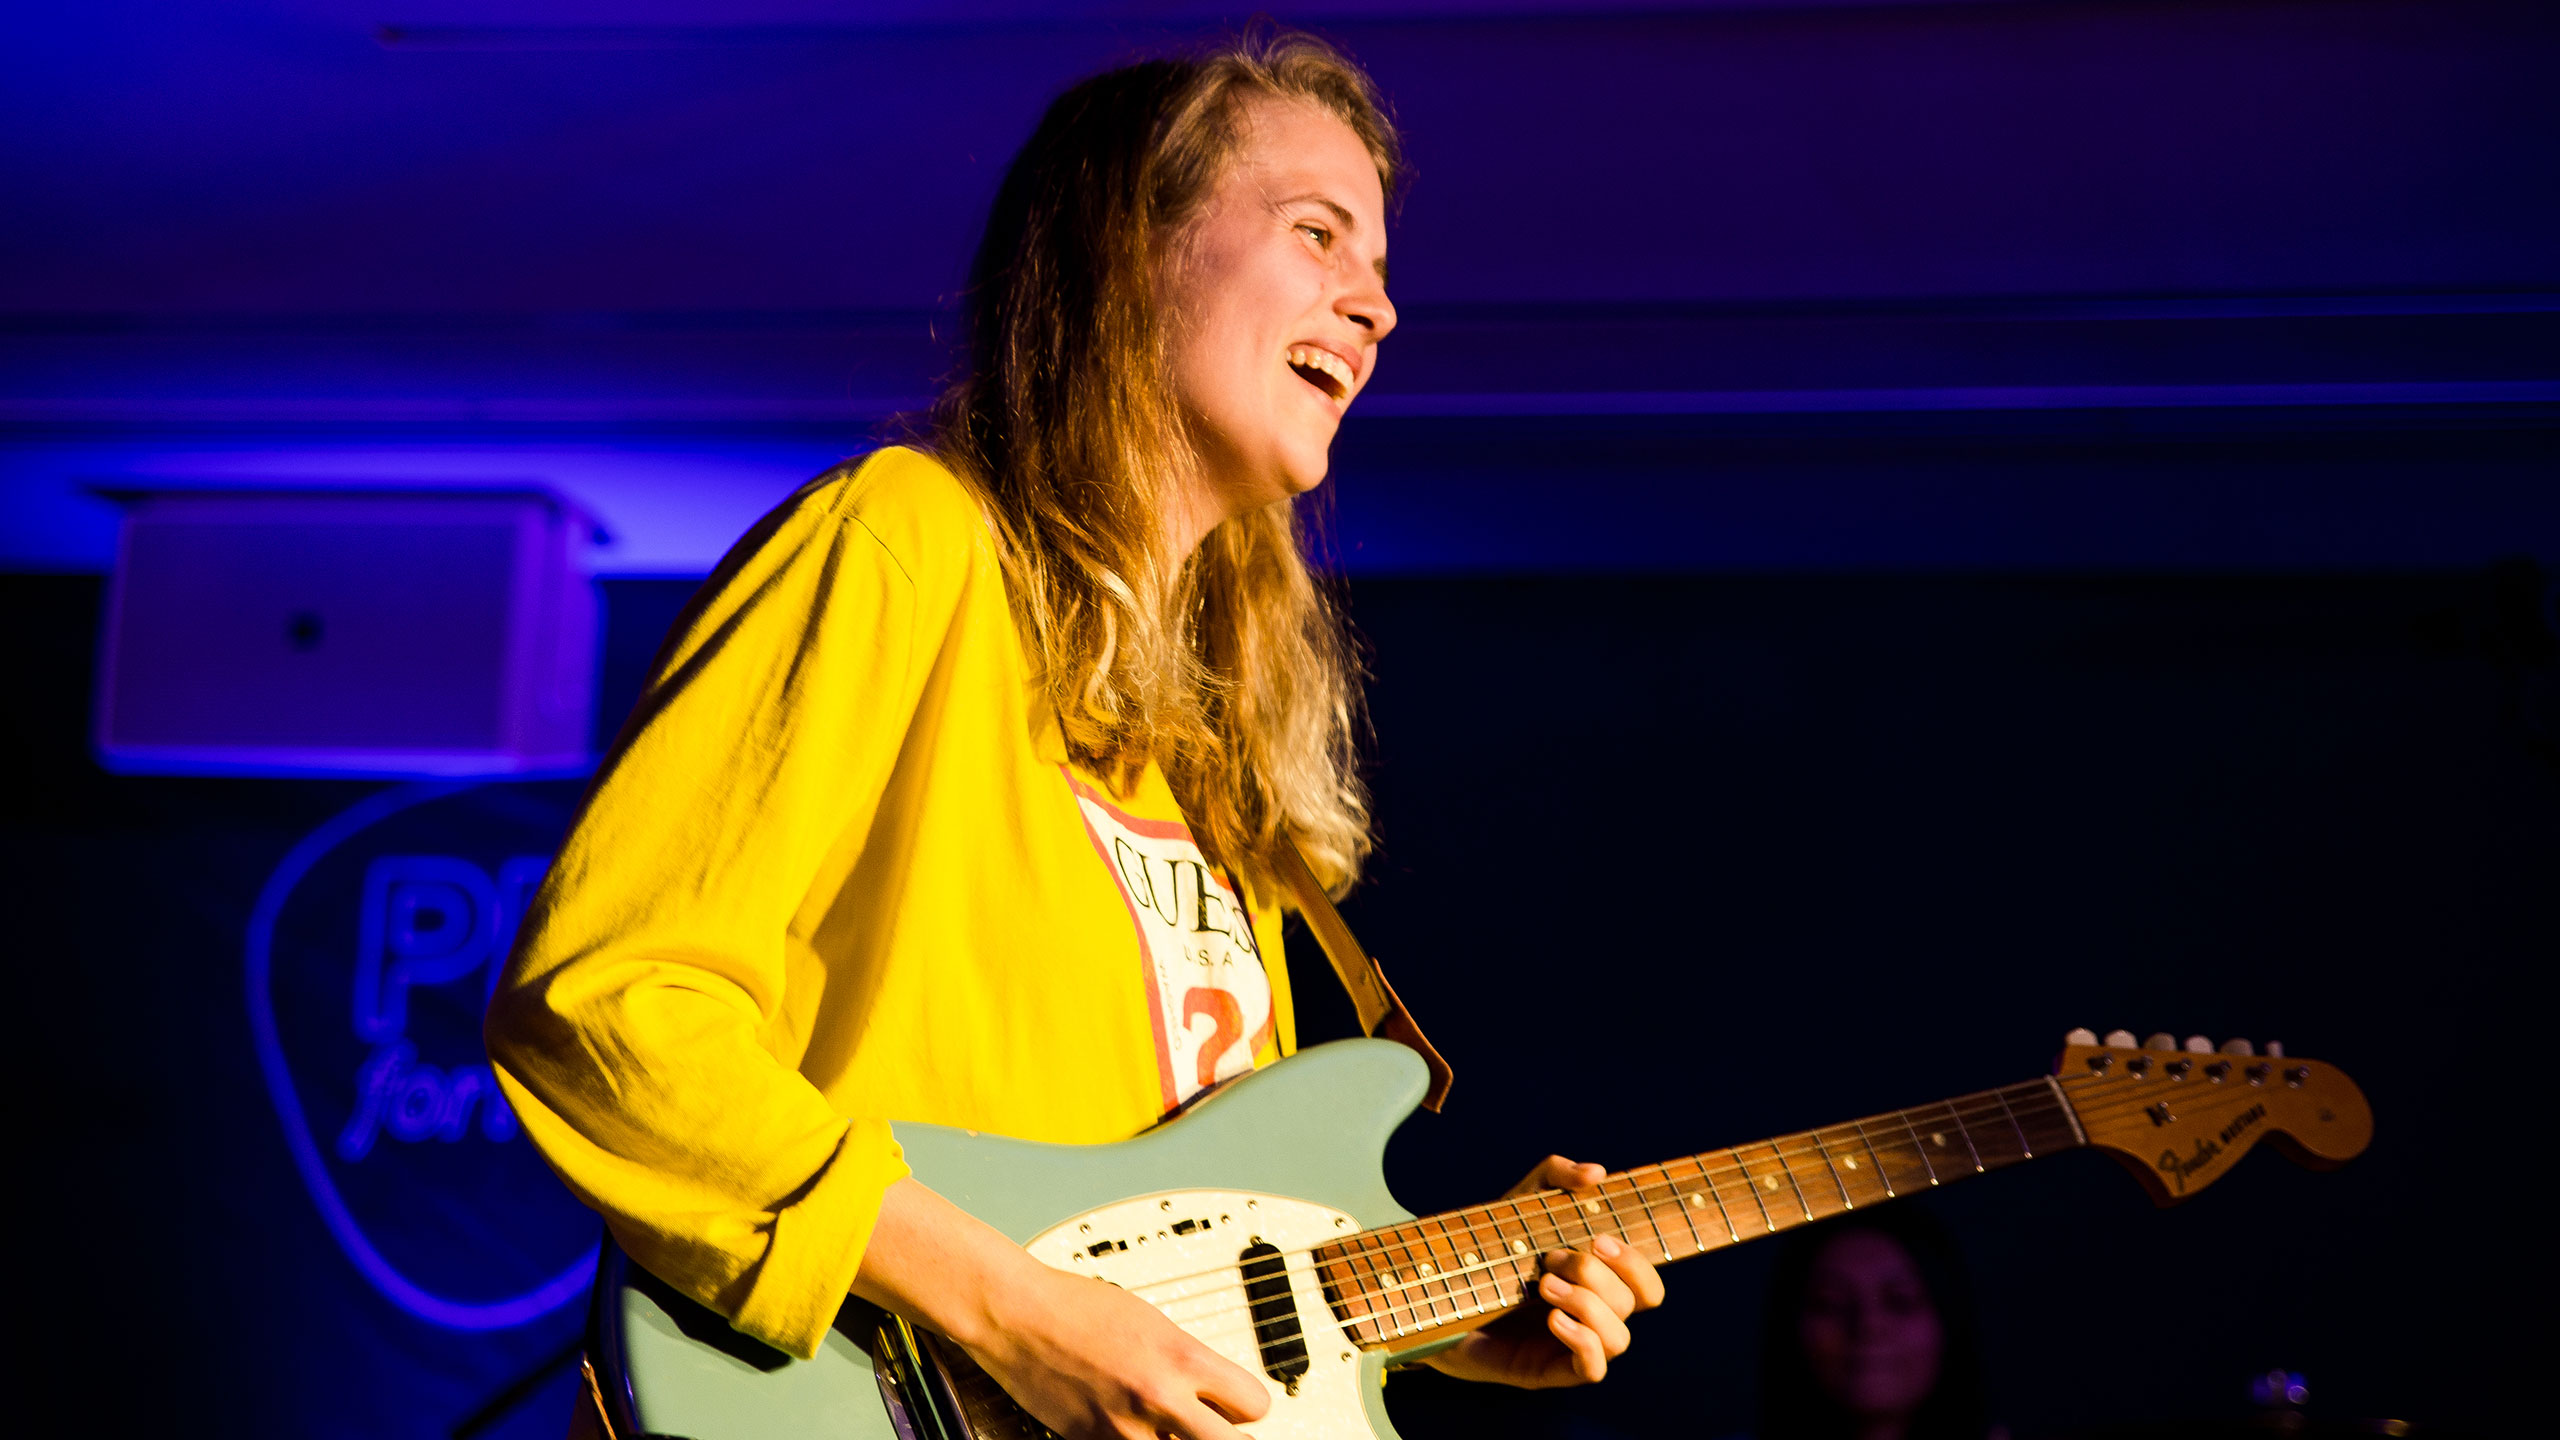 Marika Hackman, wearing a bright yellow shirt and holding her guitar, smiles at the audience on stage at PRS for Music Presents